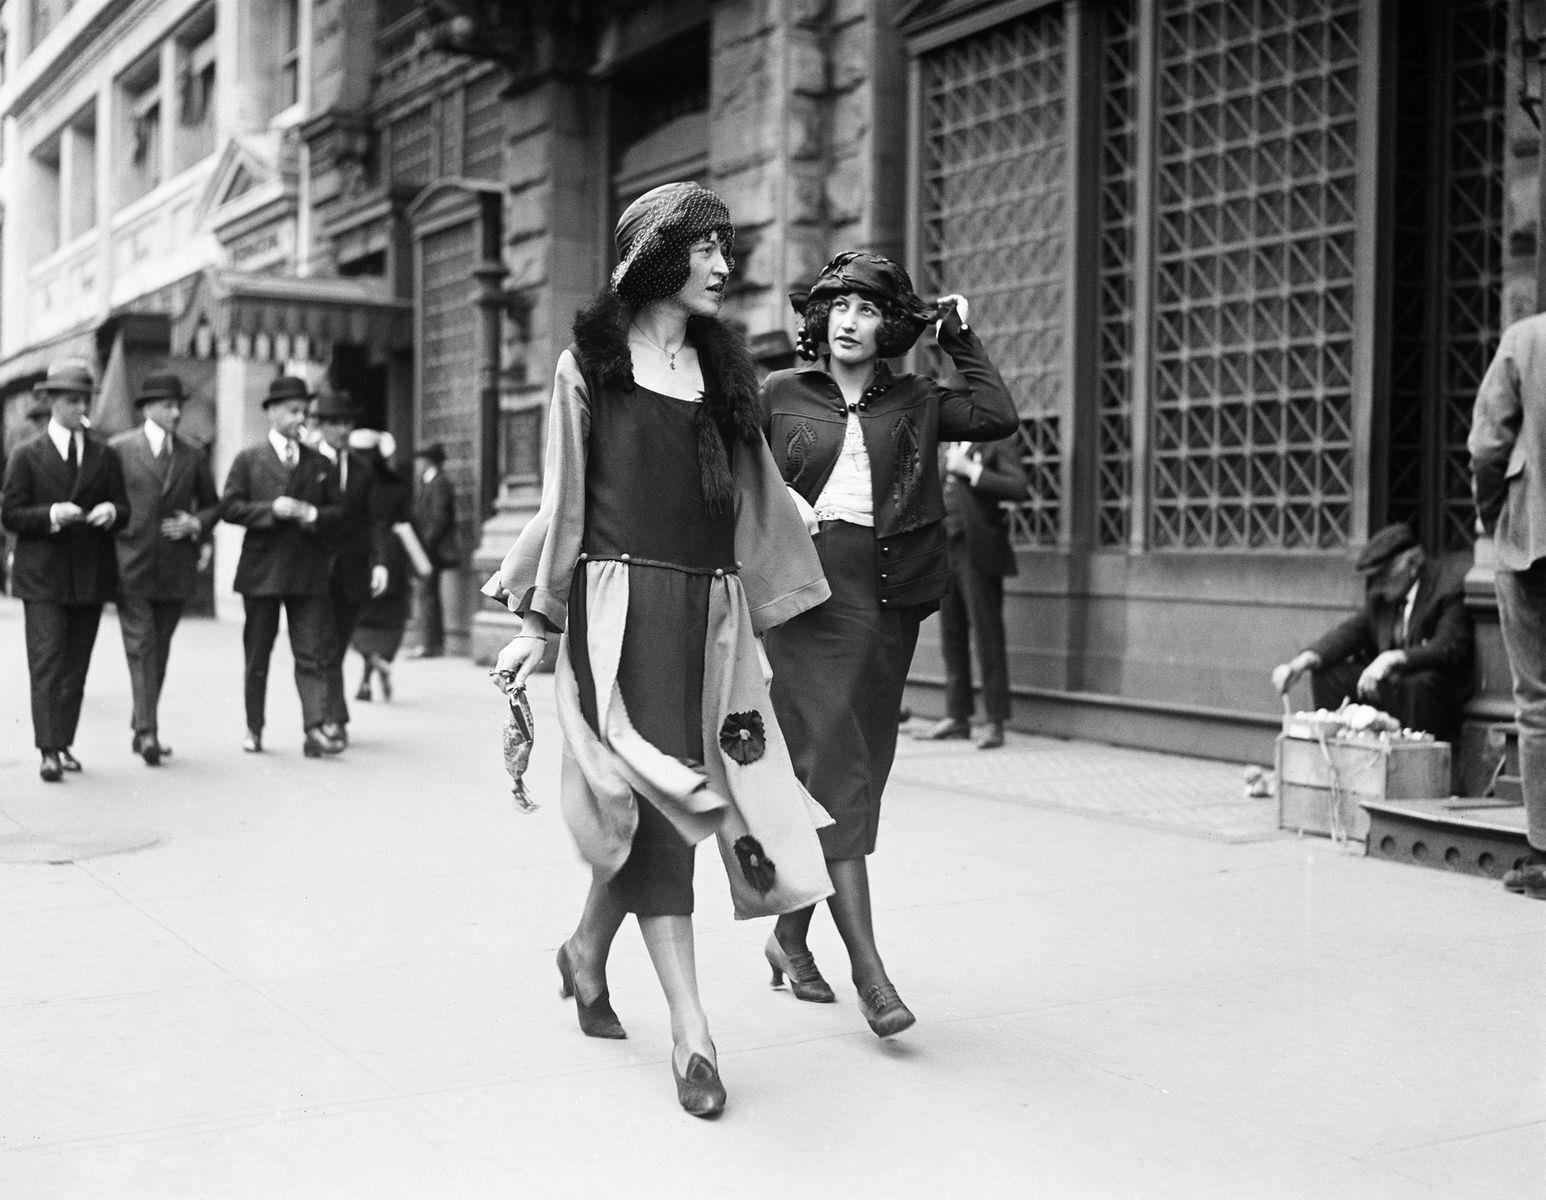 <p>The fashion of the day favoured short, bobbed hair, high-heel shoes, makeup, and <a href="https://www.history.com/topics/roaring-twenties/flappers#section_3">dresses</a> that revealed the calves yet were not form-fitting, but rather straight and slim.</p>